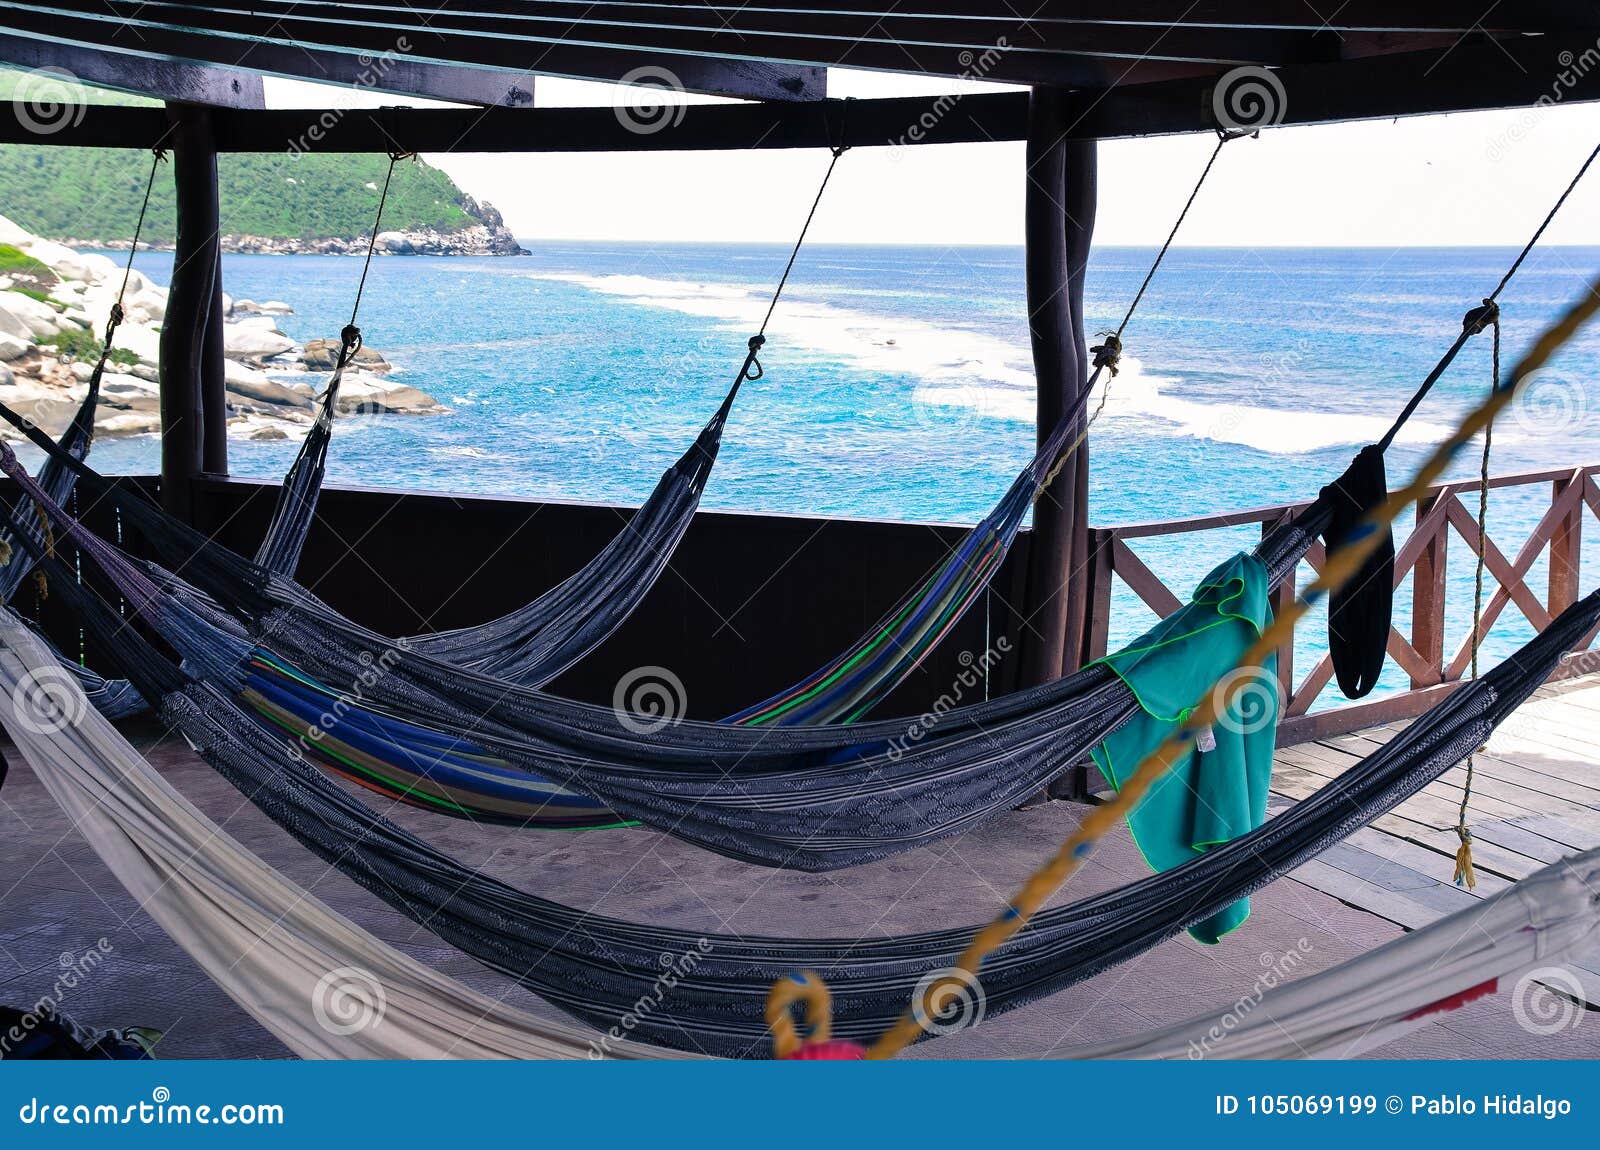 many relaxing hammocks under a bungalow, with a blurred ocean background in tairona national park, colombia